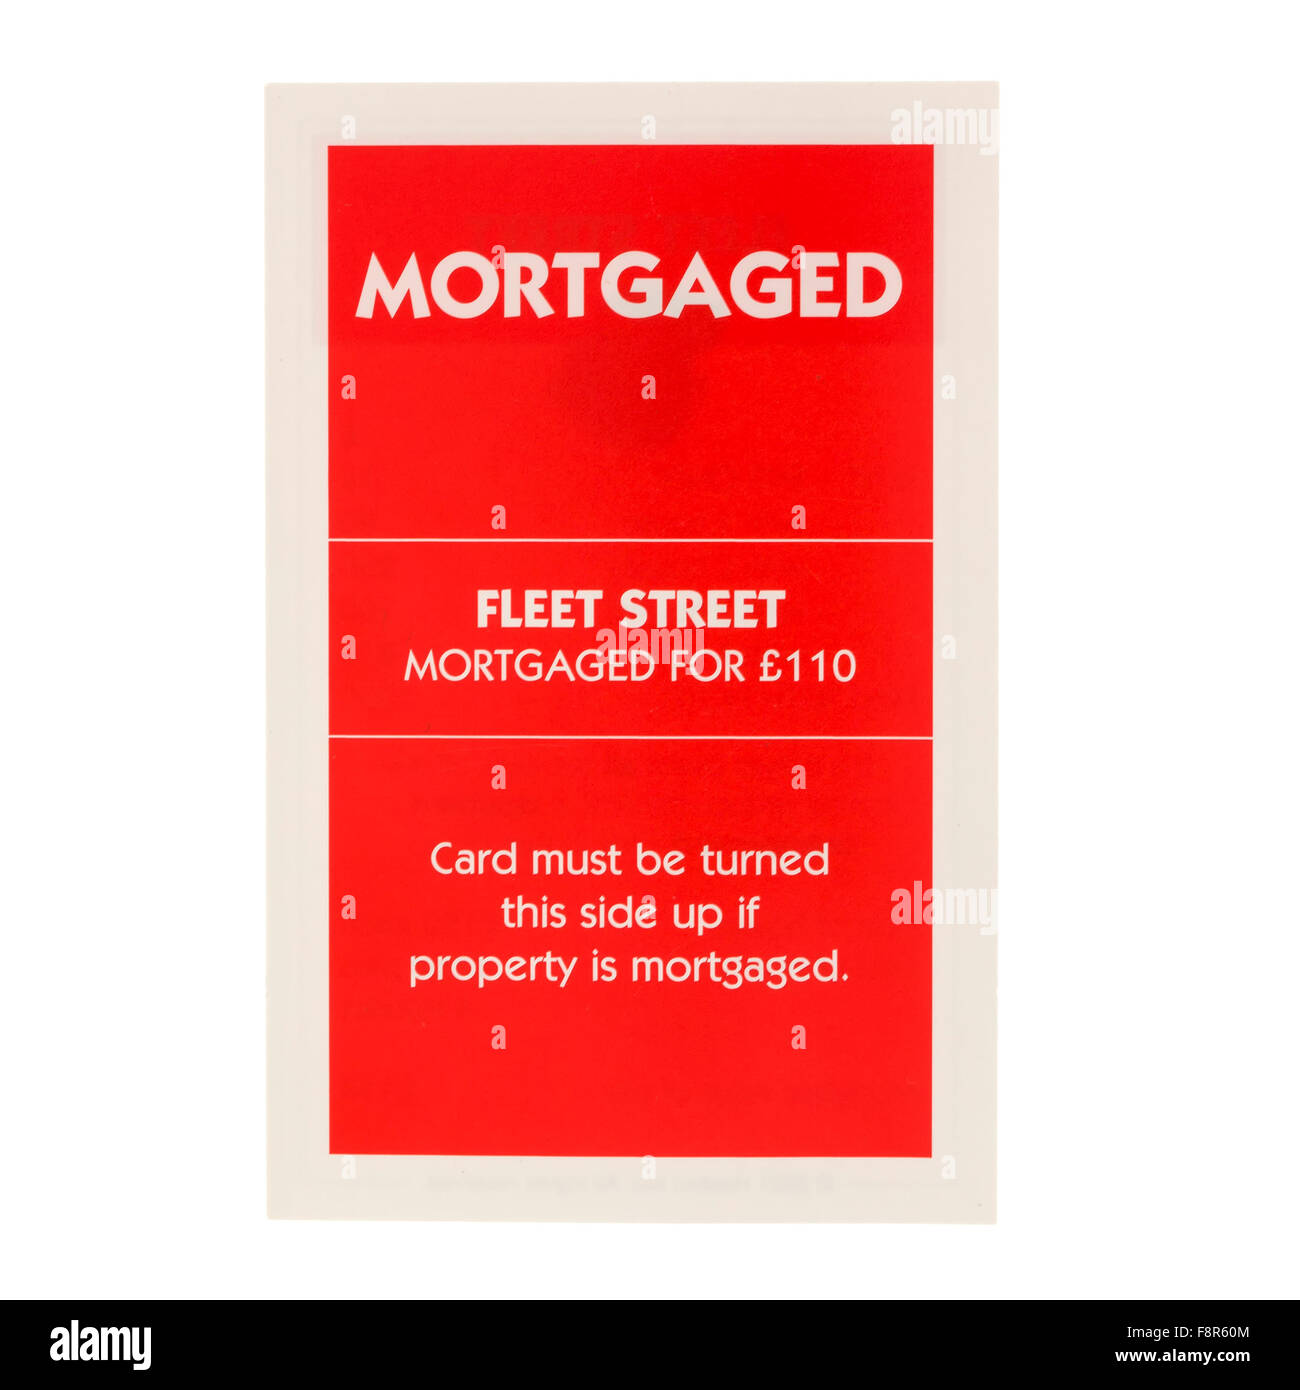 English Edition of Monopoly Mortgaged Card for Fleet Street,  The classic trading game from Parker Stock Photo